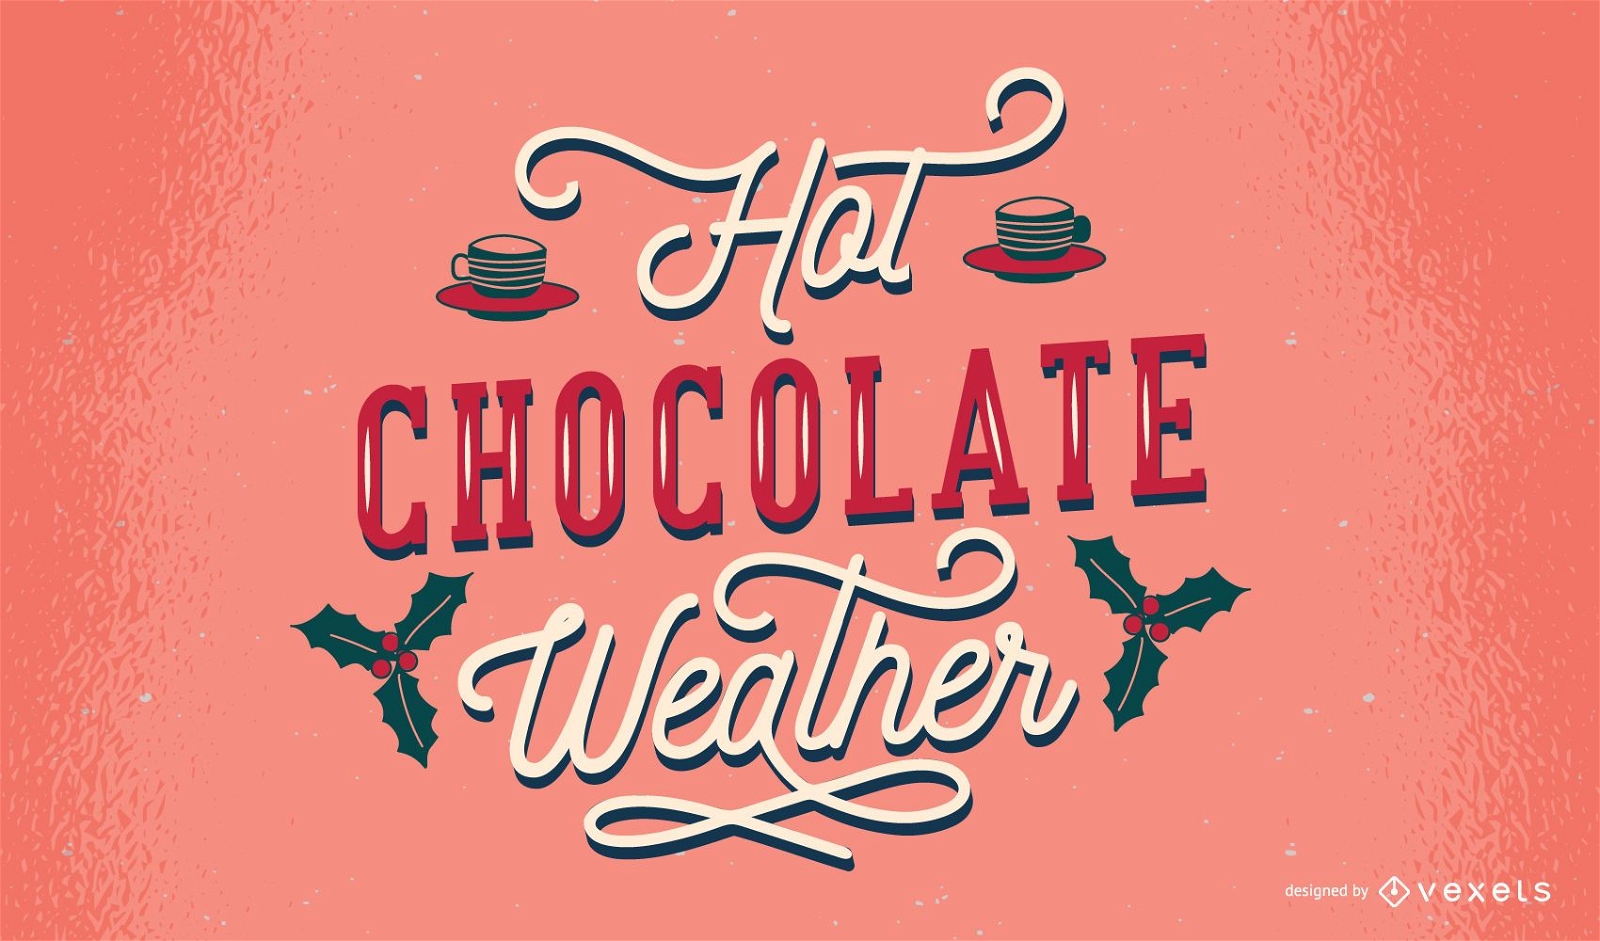 Hot chocolate weather lettering design